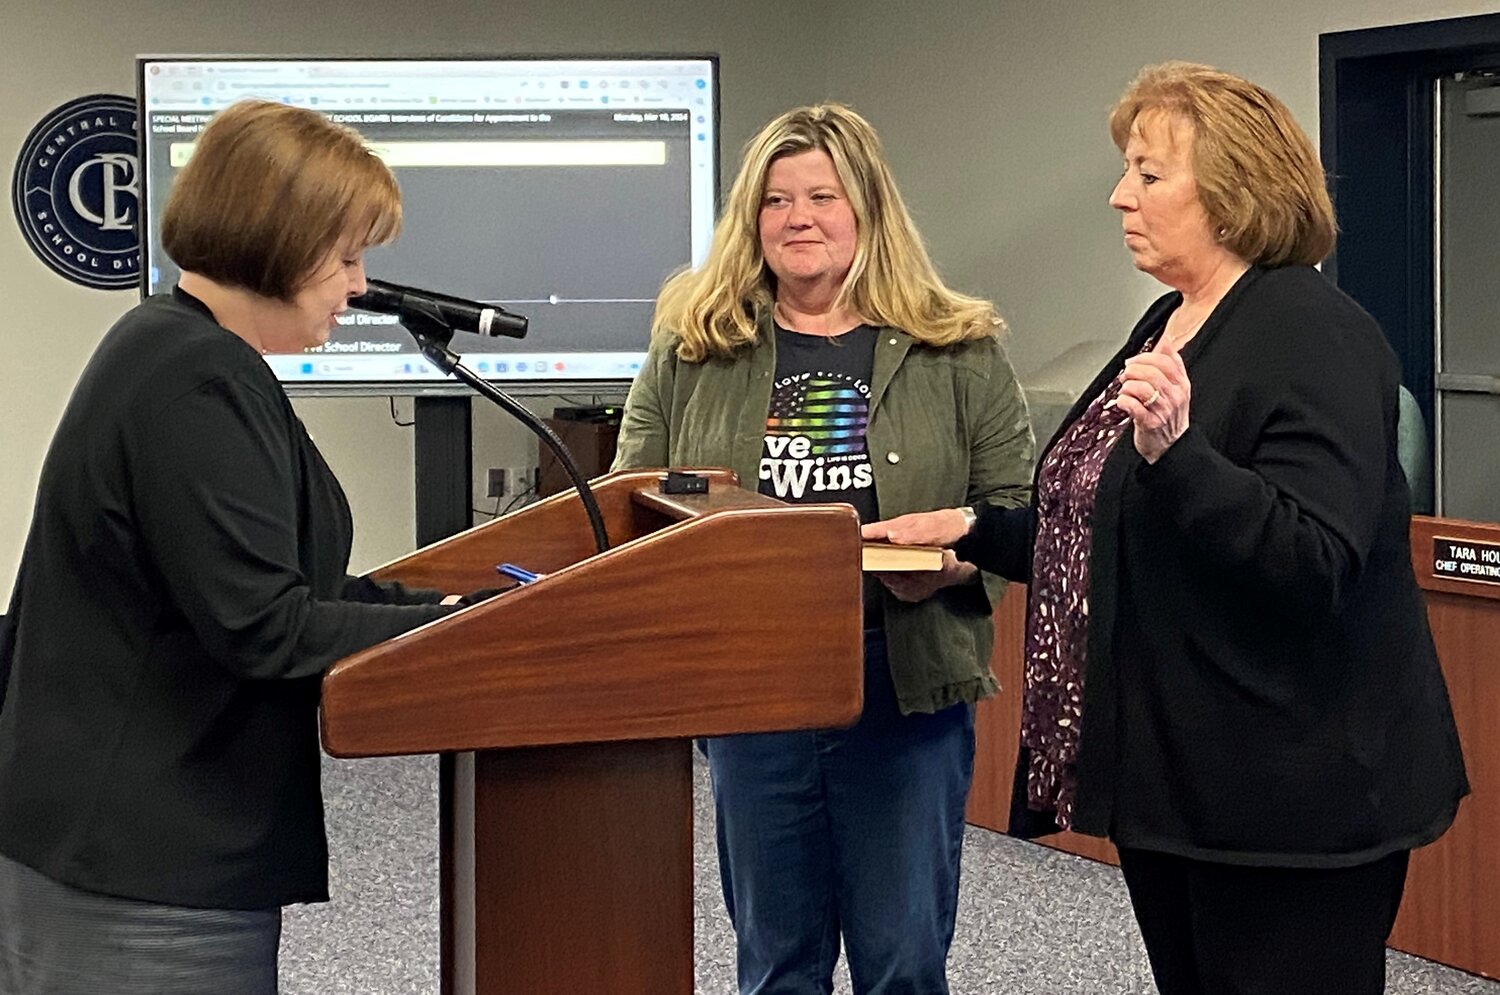 Stephanie Radcliffe, Assistant  to the Superintendent, swears in Jenine Zdanowicz following her appointment to the Central Bucks School Board Monday as Board President Karen Smith looks on.